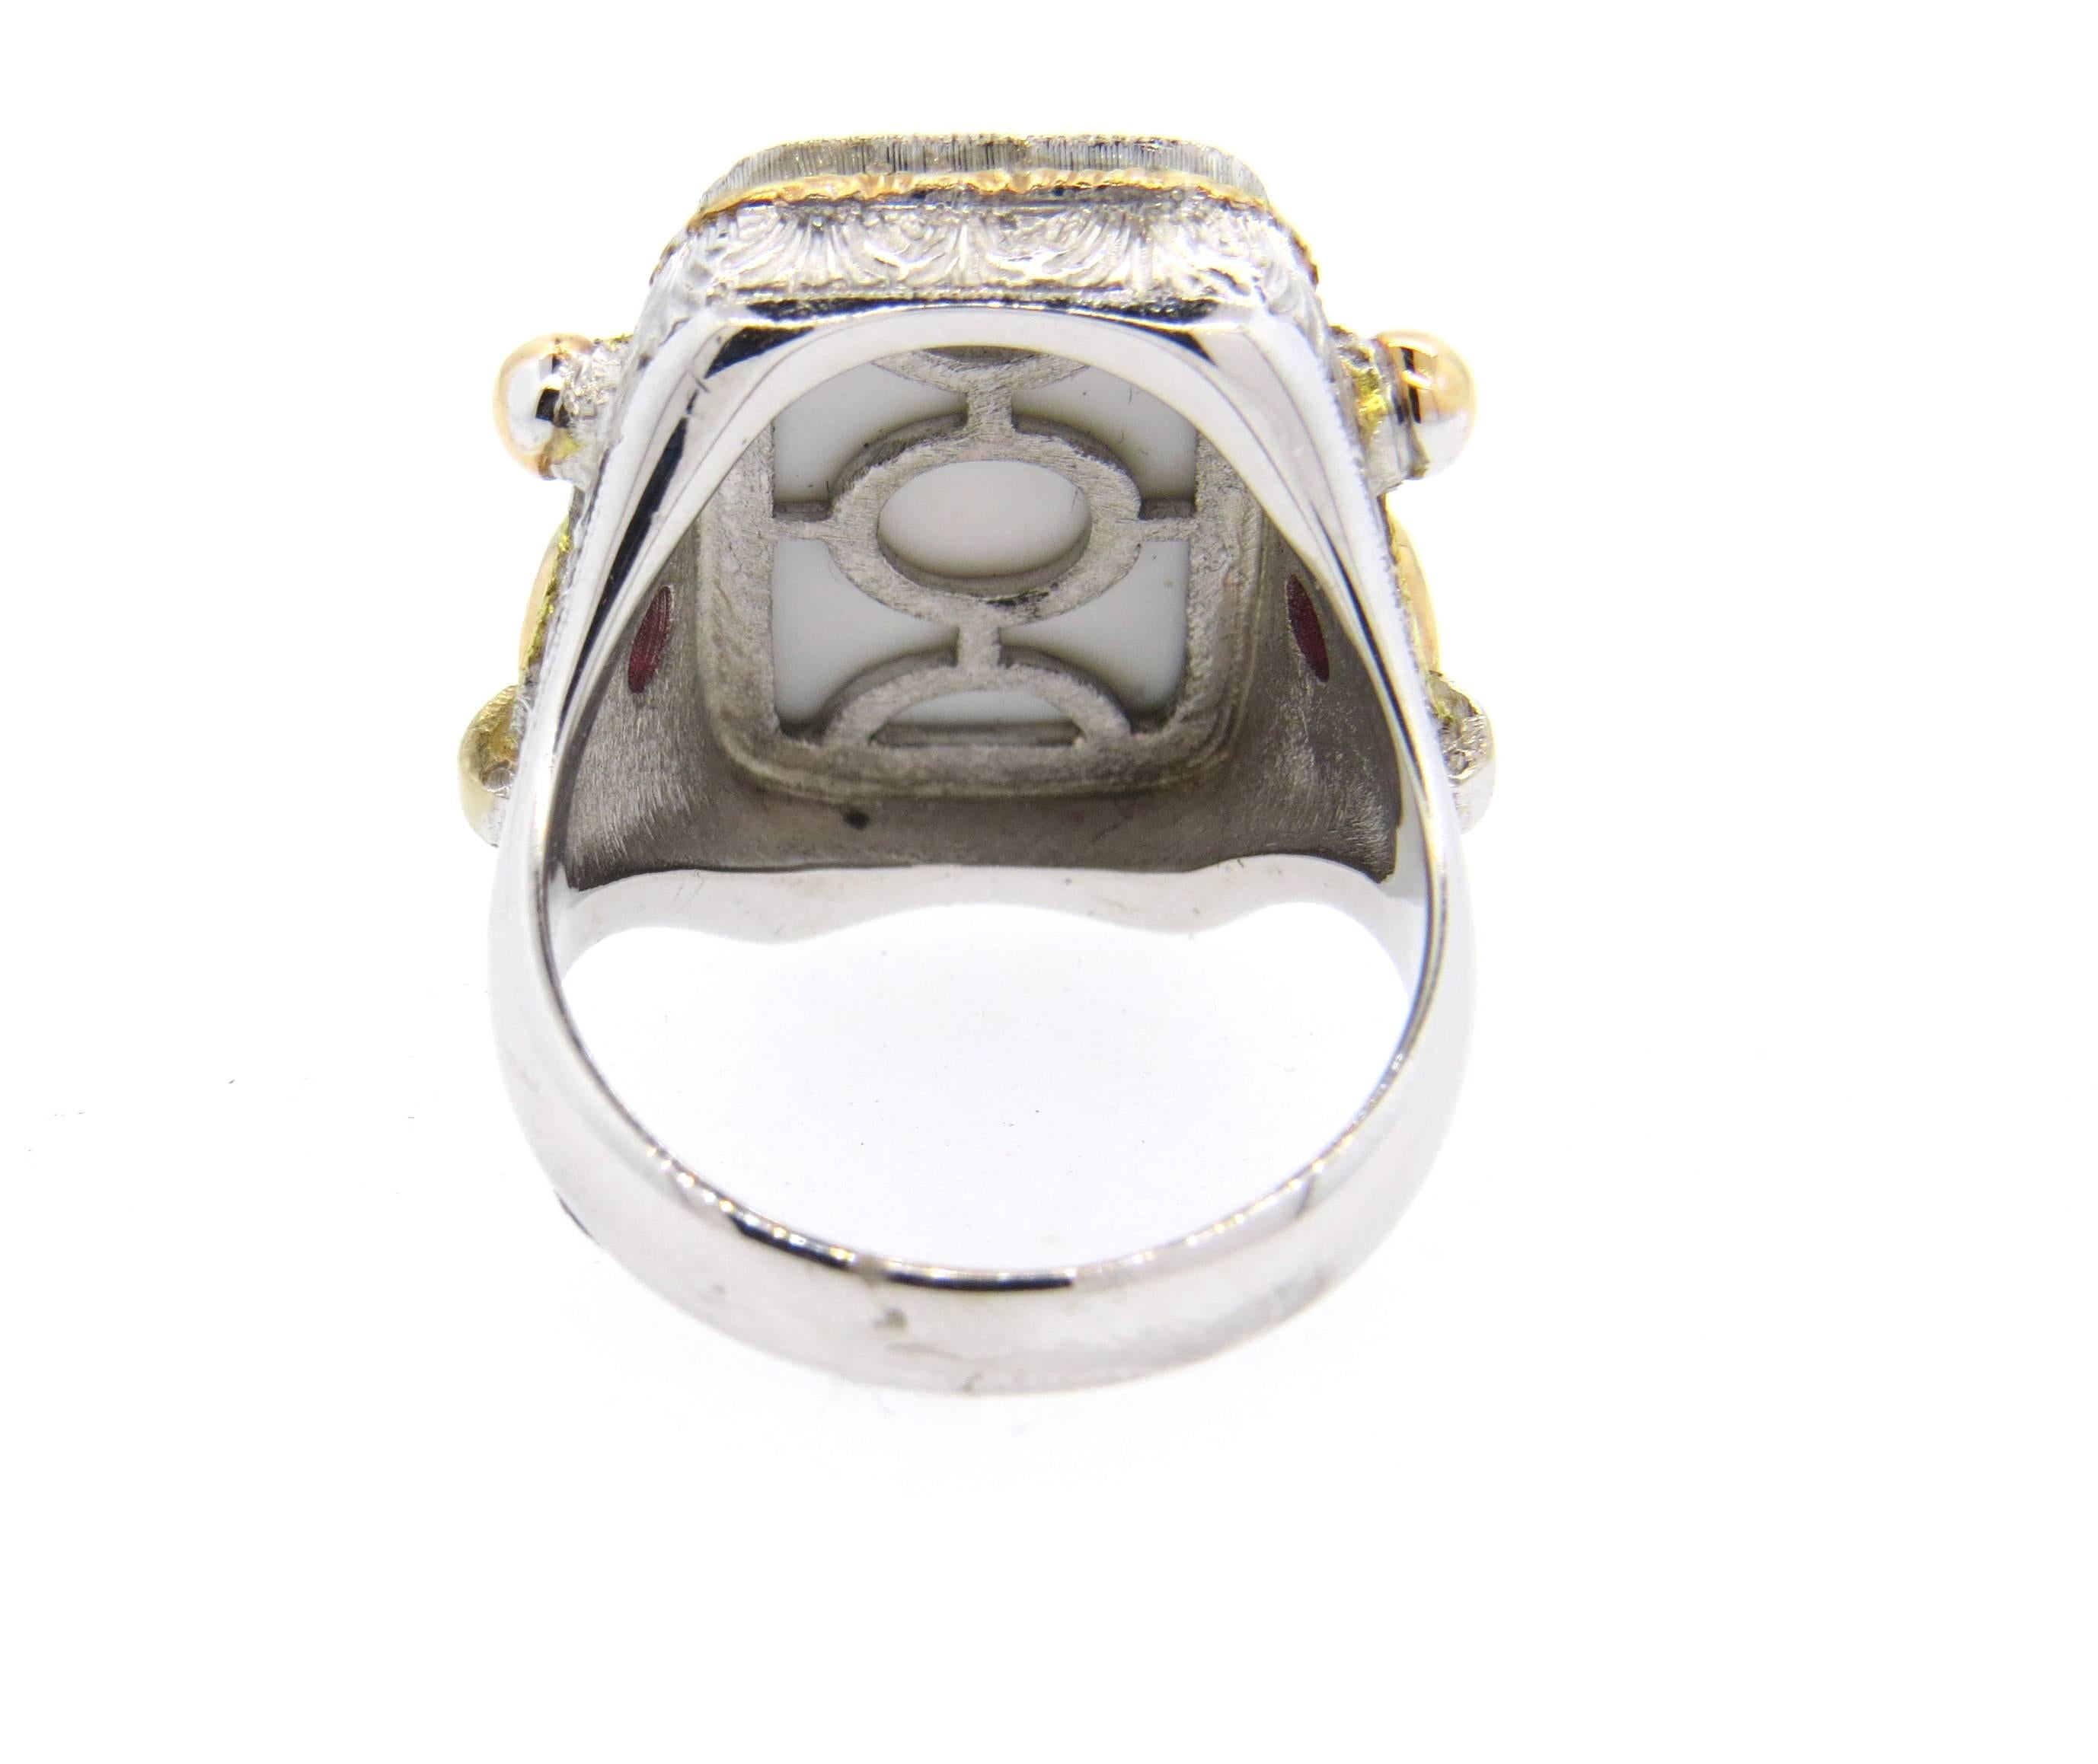 Large Cazzaniga ring, crafted in rose, white and yellow gold, set with green hardstone intaglio and two side rubies. Ring size 8, ring top is 21mm x 21mm. Marked: Cazzaniga, Roma, 750. Weight of the piece - 18.4 grams 